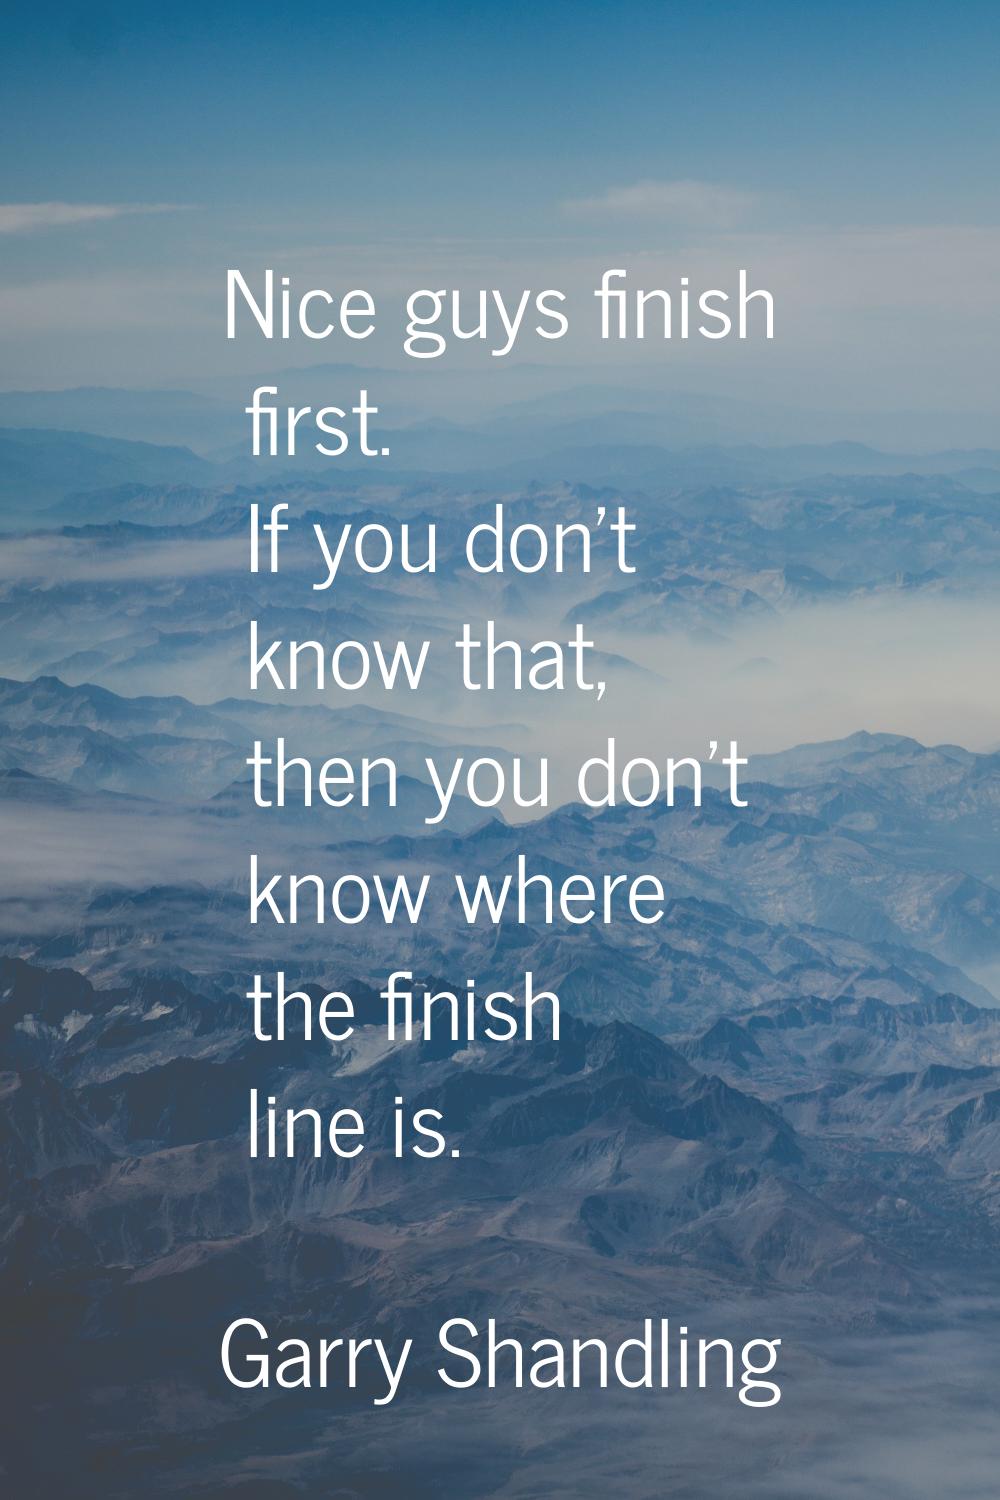 Nice guys finish first. If you don't know that, then you don't know where the finish line is.